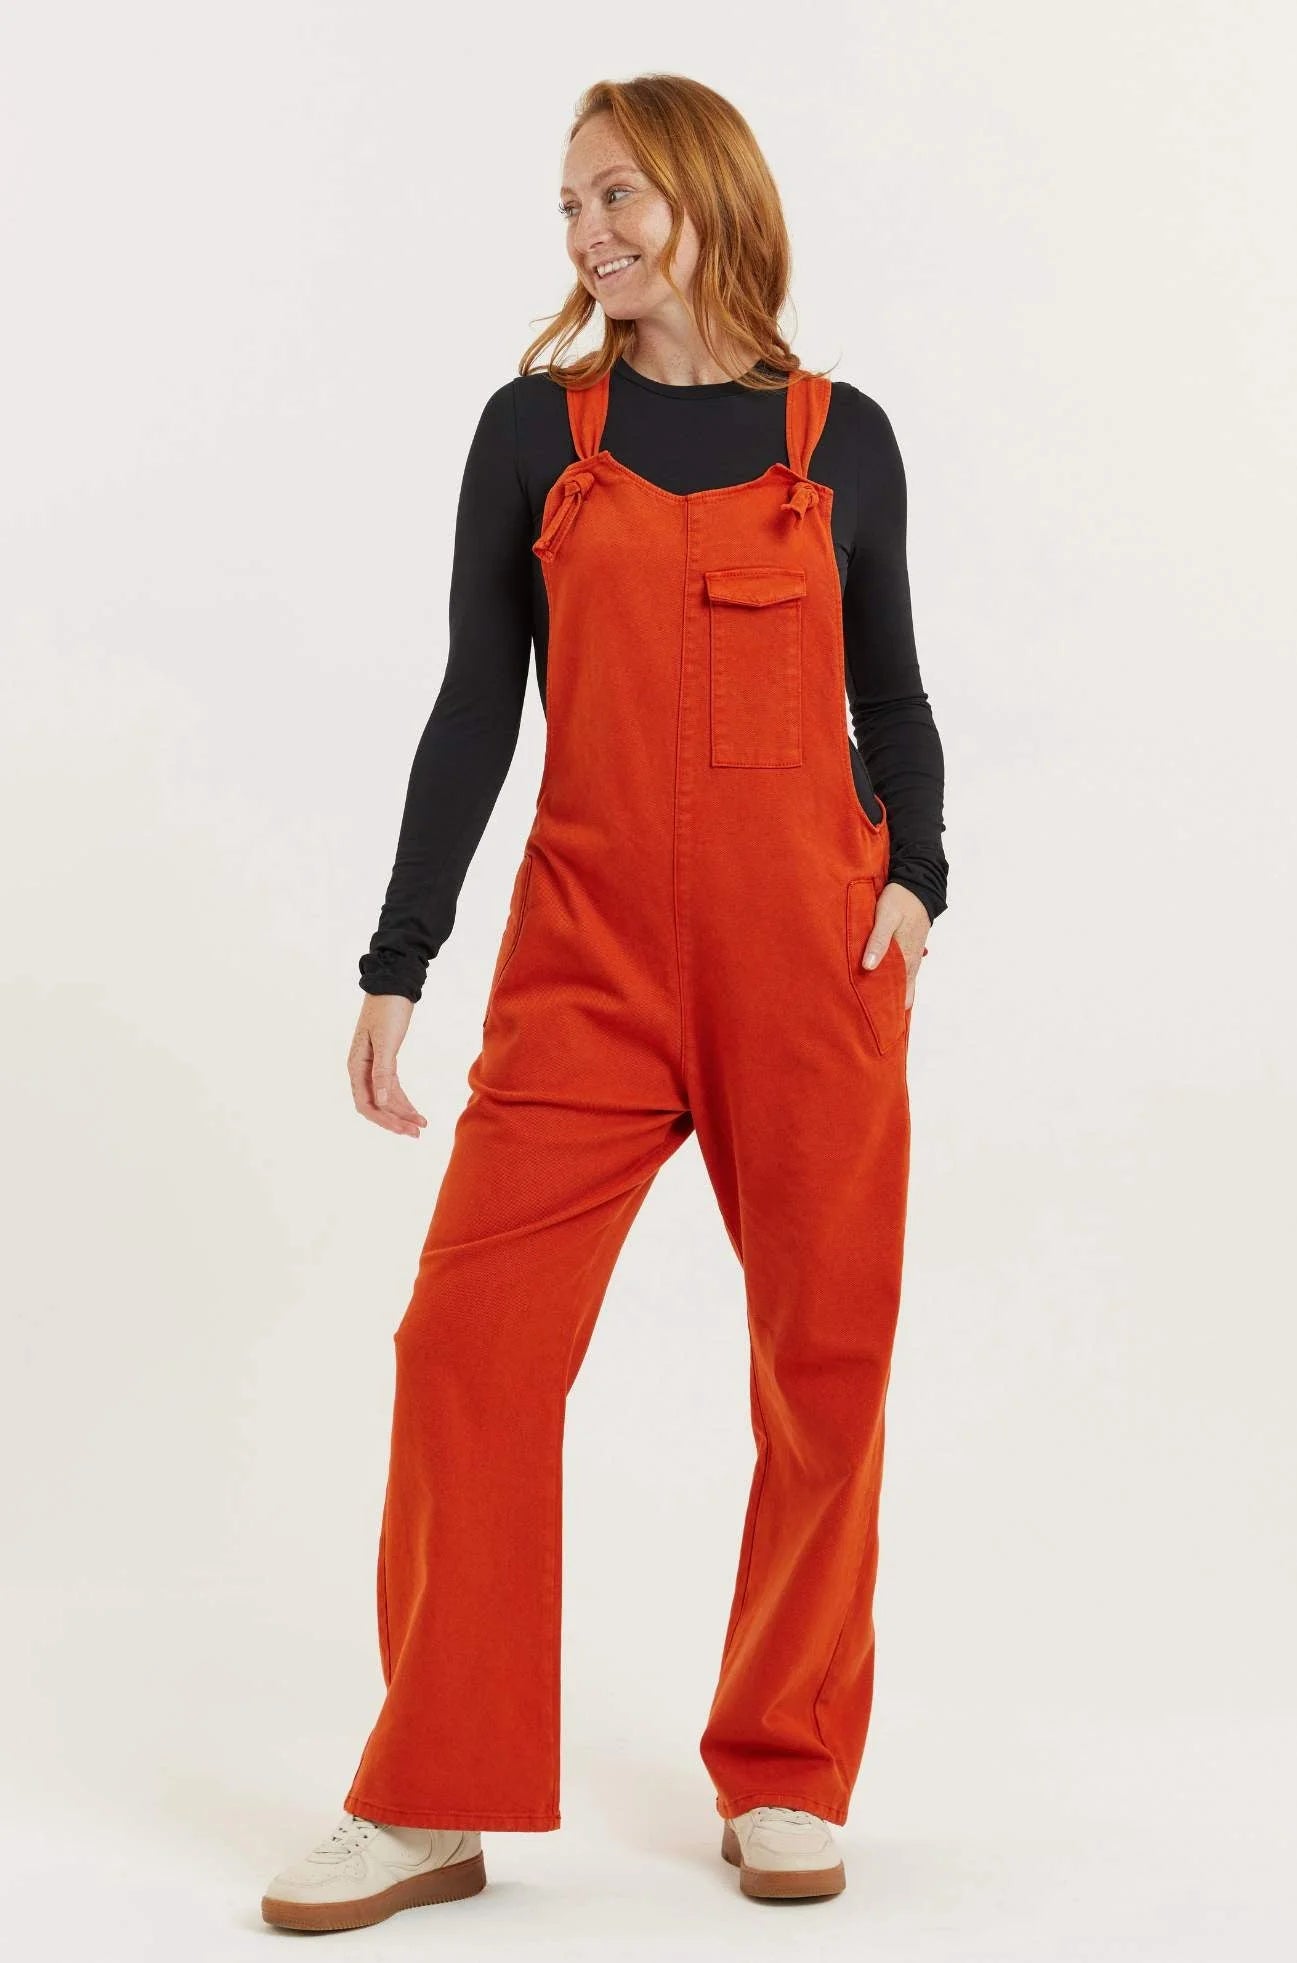 Flax and Loom Mary-Lou Recycled Wood Denim Dungarees - Burnt Orange